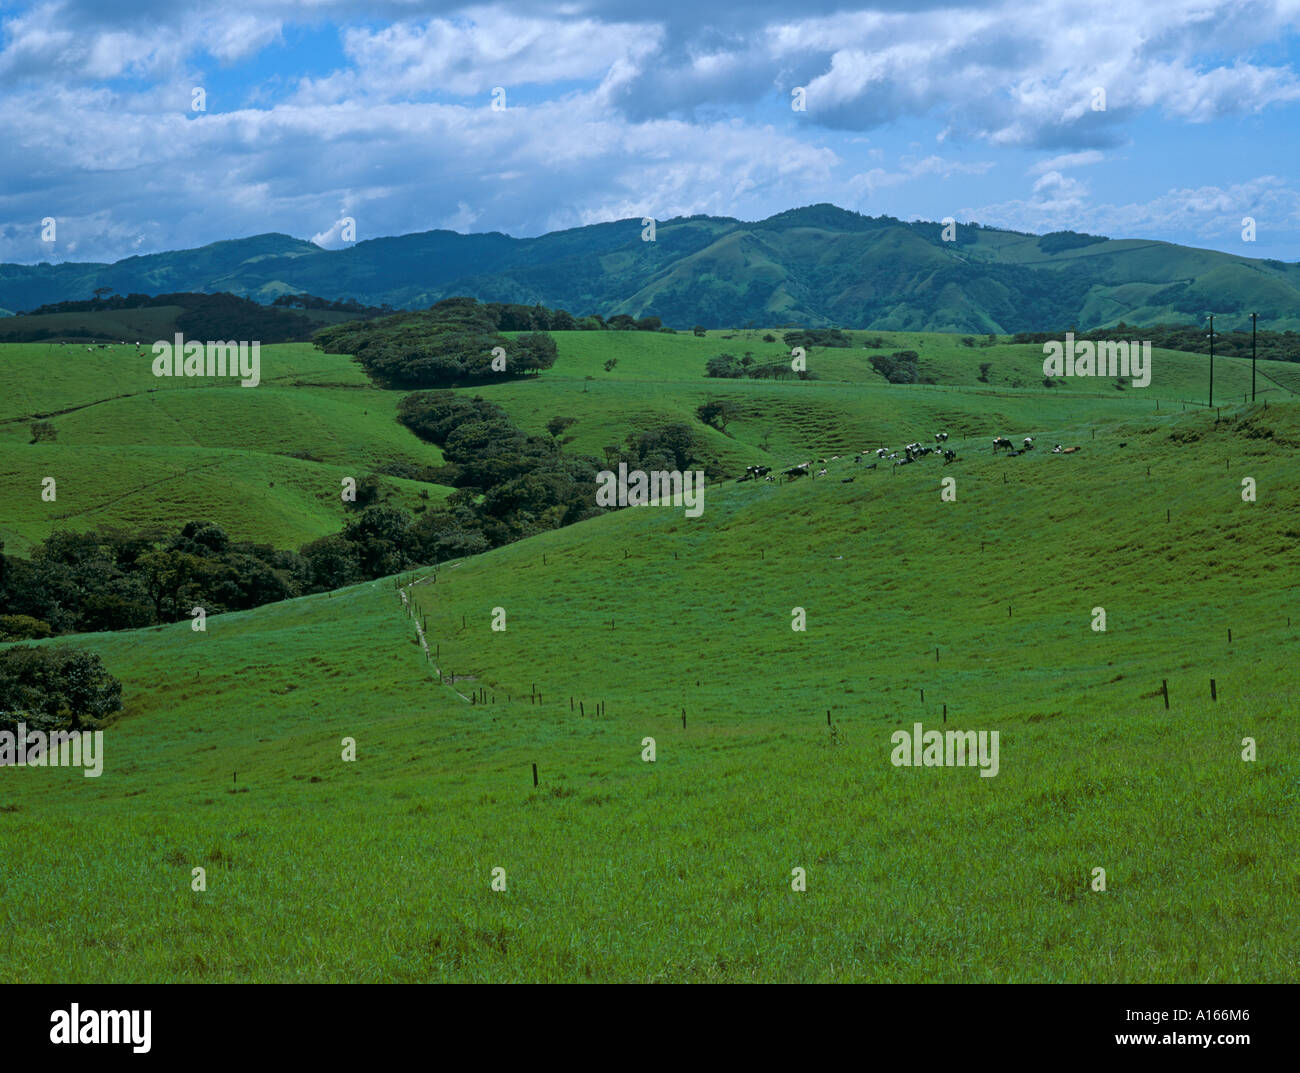 Deforested uplands once covered in cold forest now agricultural fields Costa Rica Central America Stock Photo